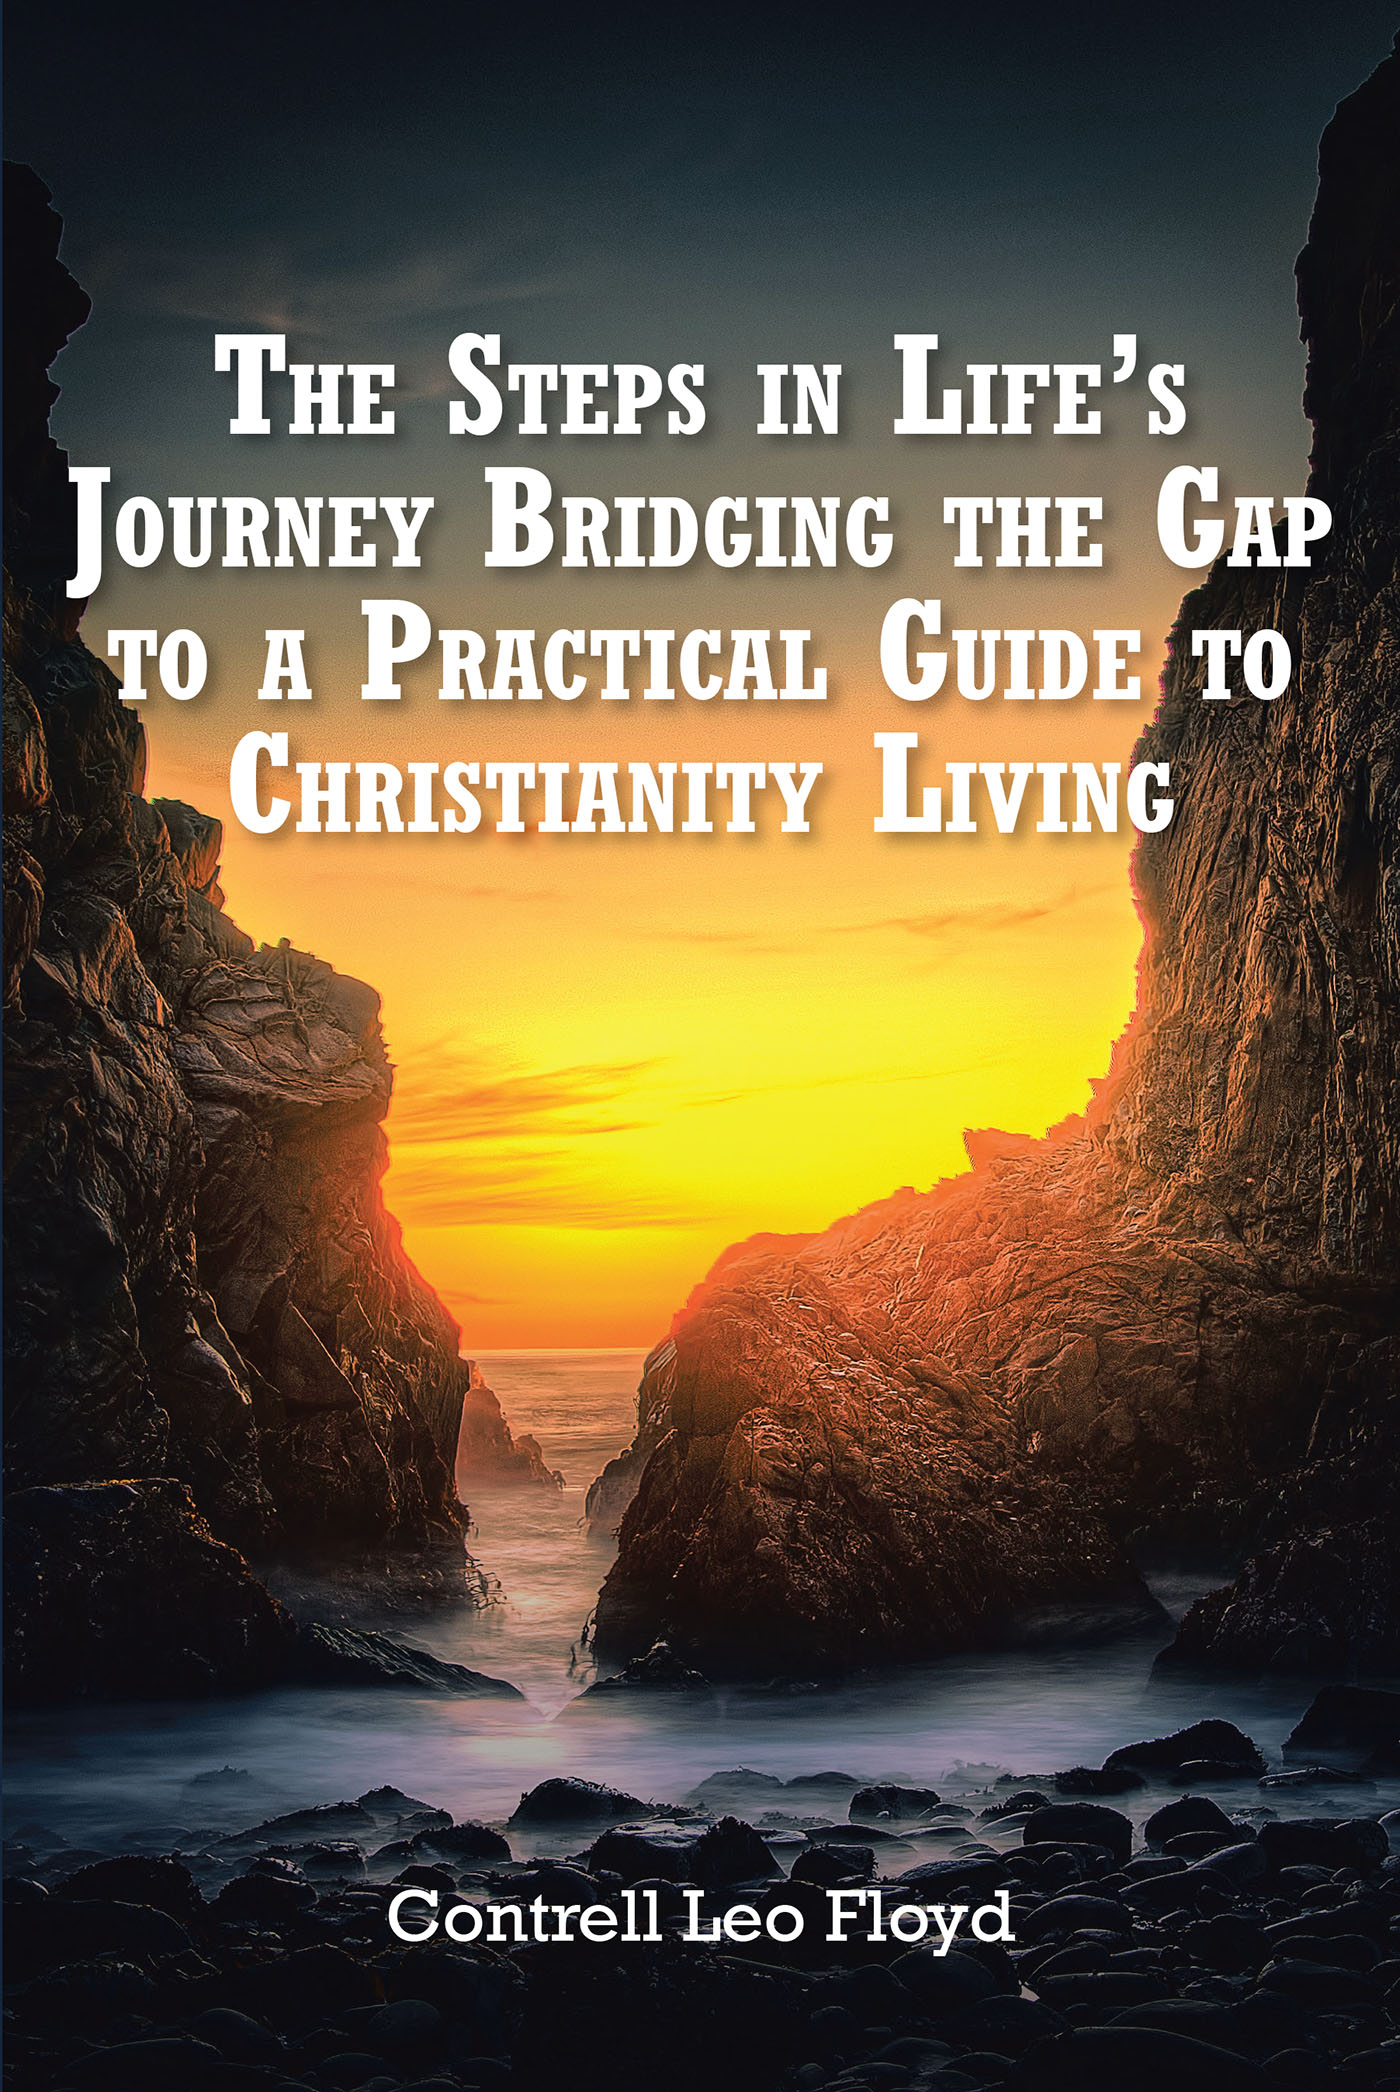 Contrell Leo Floyd’s Newly Released “The Steps in Life’s Journey Bridging the Gap to a Practical Guide to Christianity Living” is an Engaging Memoir